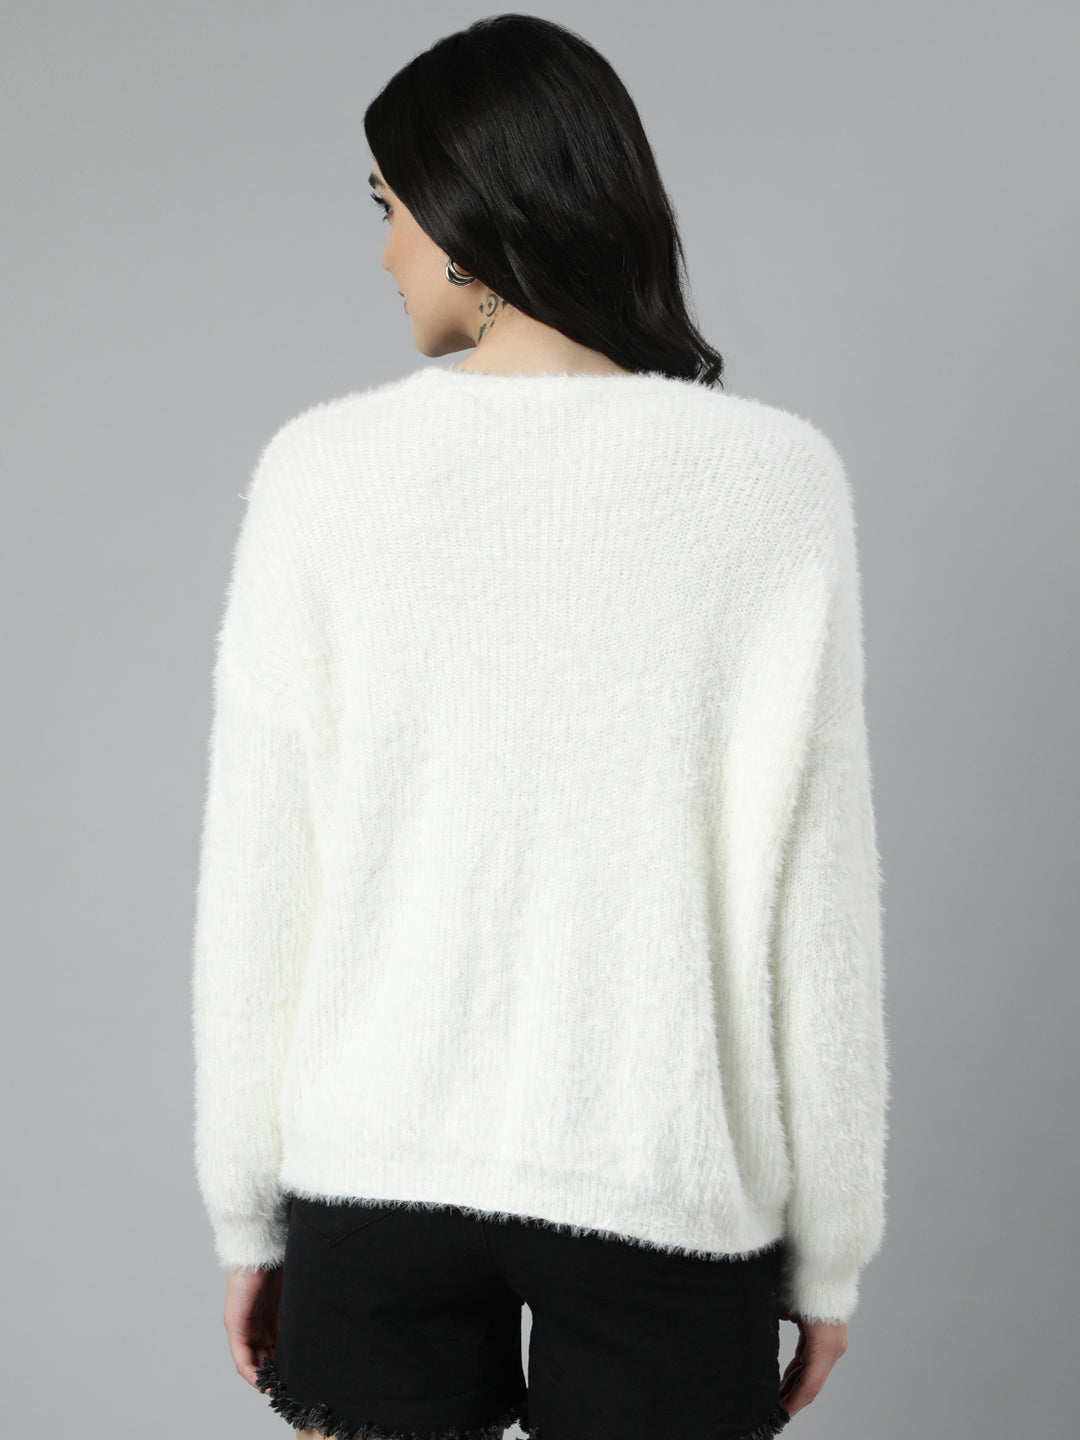 Women Solid Off White Cardigan